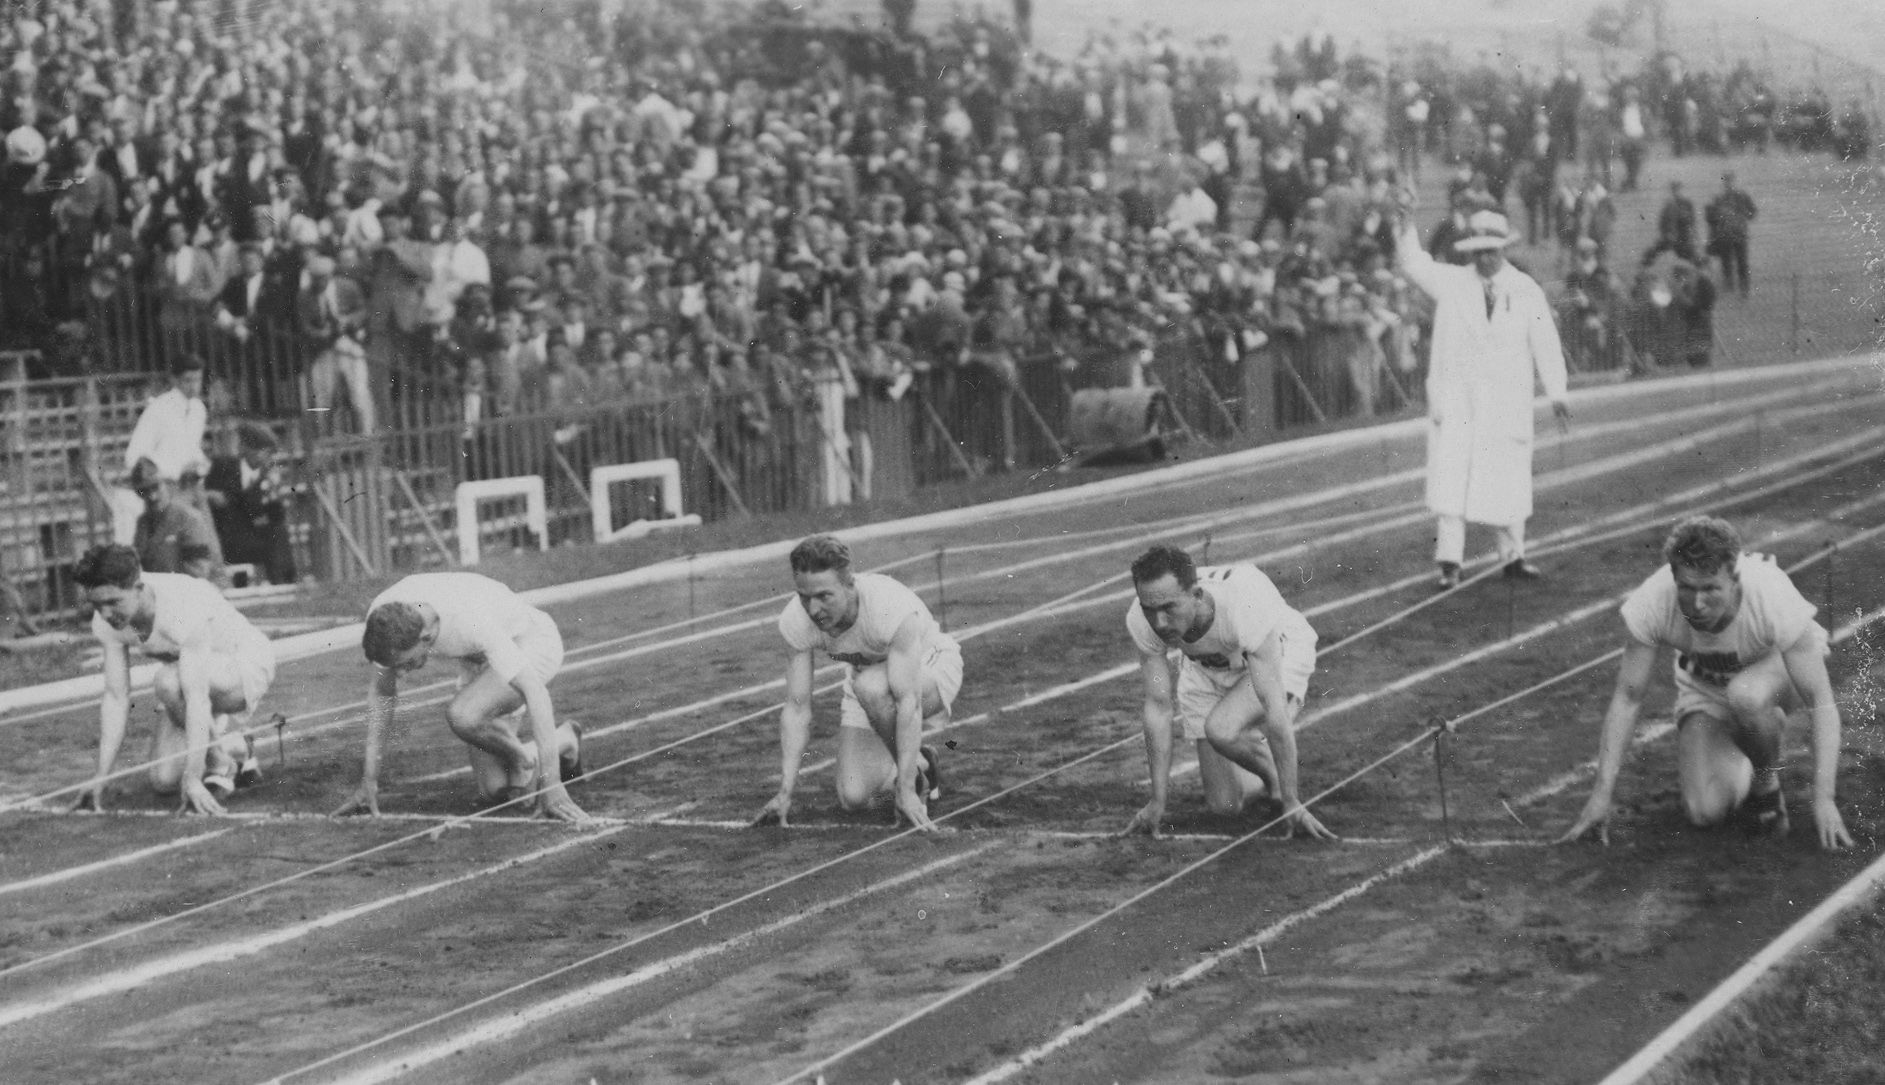 Sprinters at the 1924 Games would dig out holes on the track from which to start